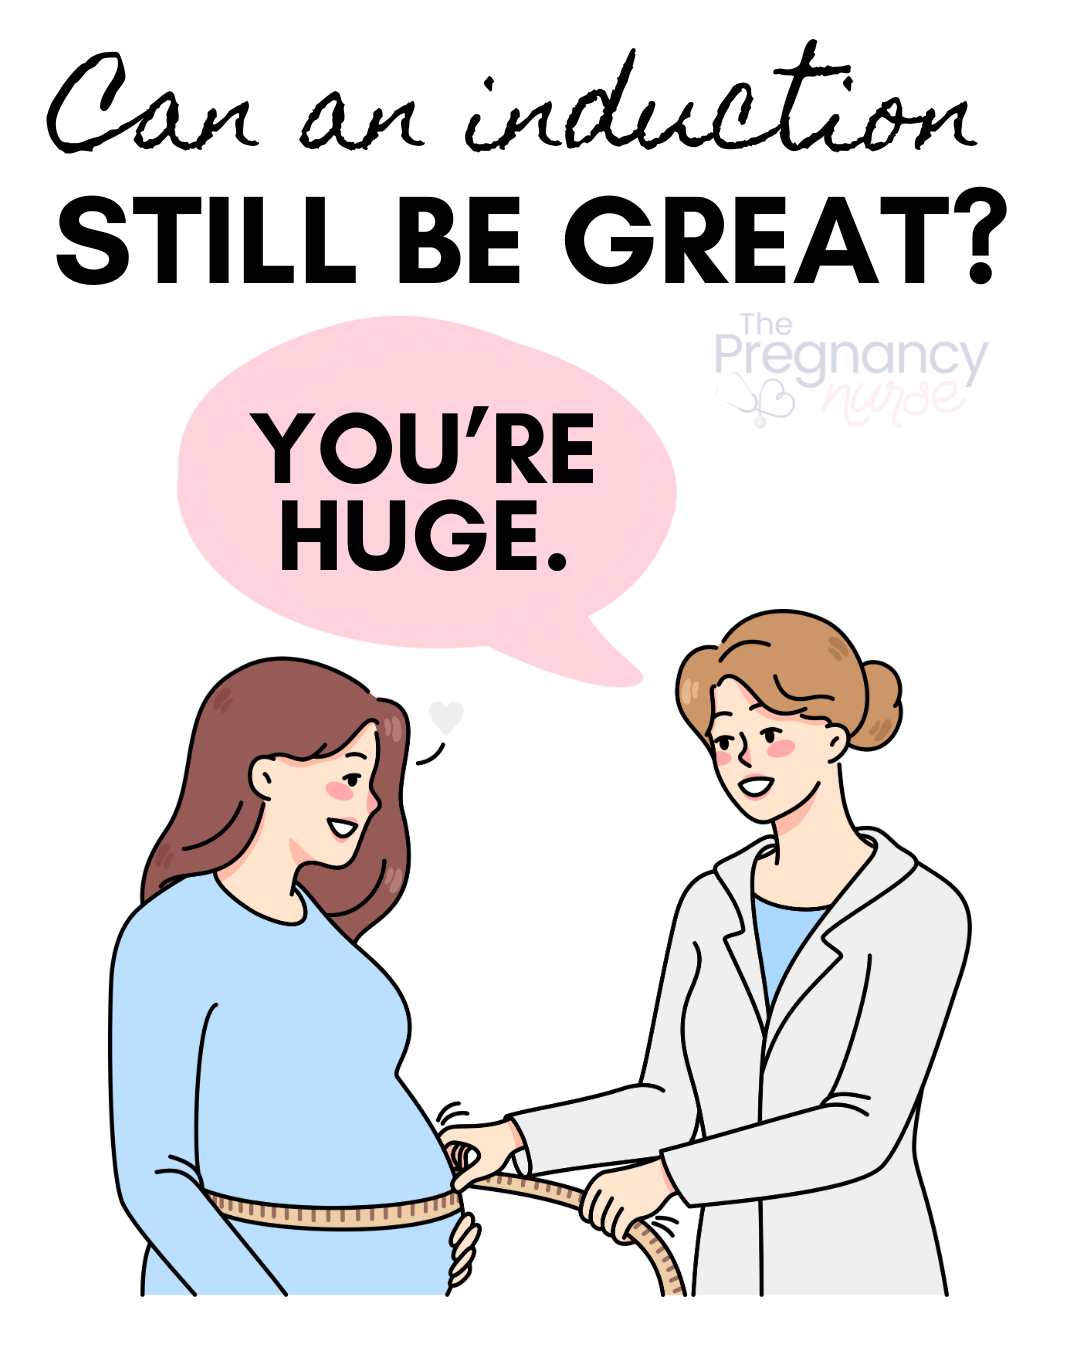 can an induction still be great / provider telling a pregnant woman "you're huge"